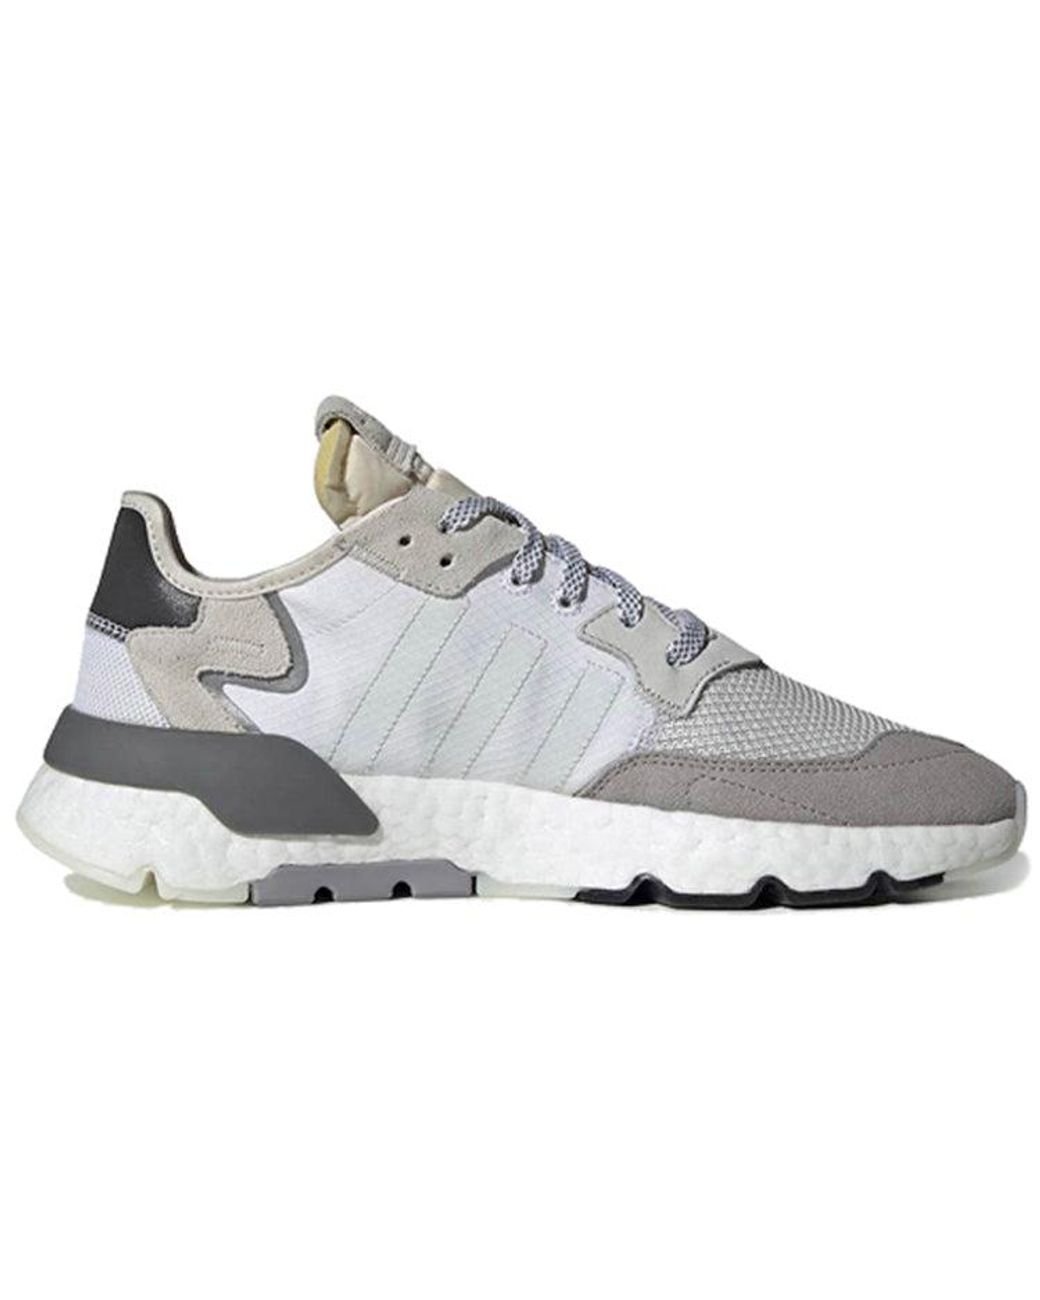 adidas Nite jogger 'grey Pack - Neutral White' for Men | Lyst